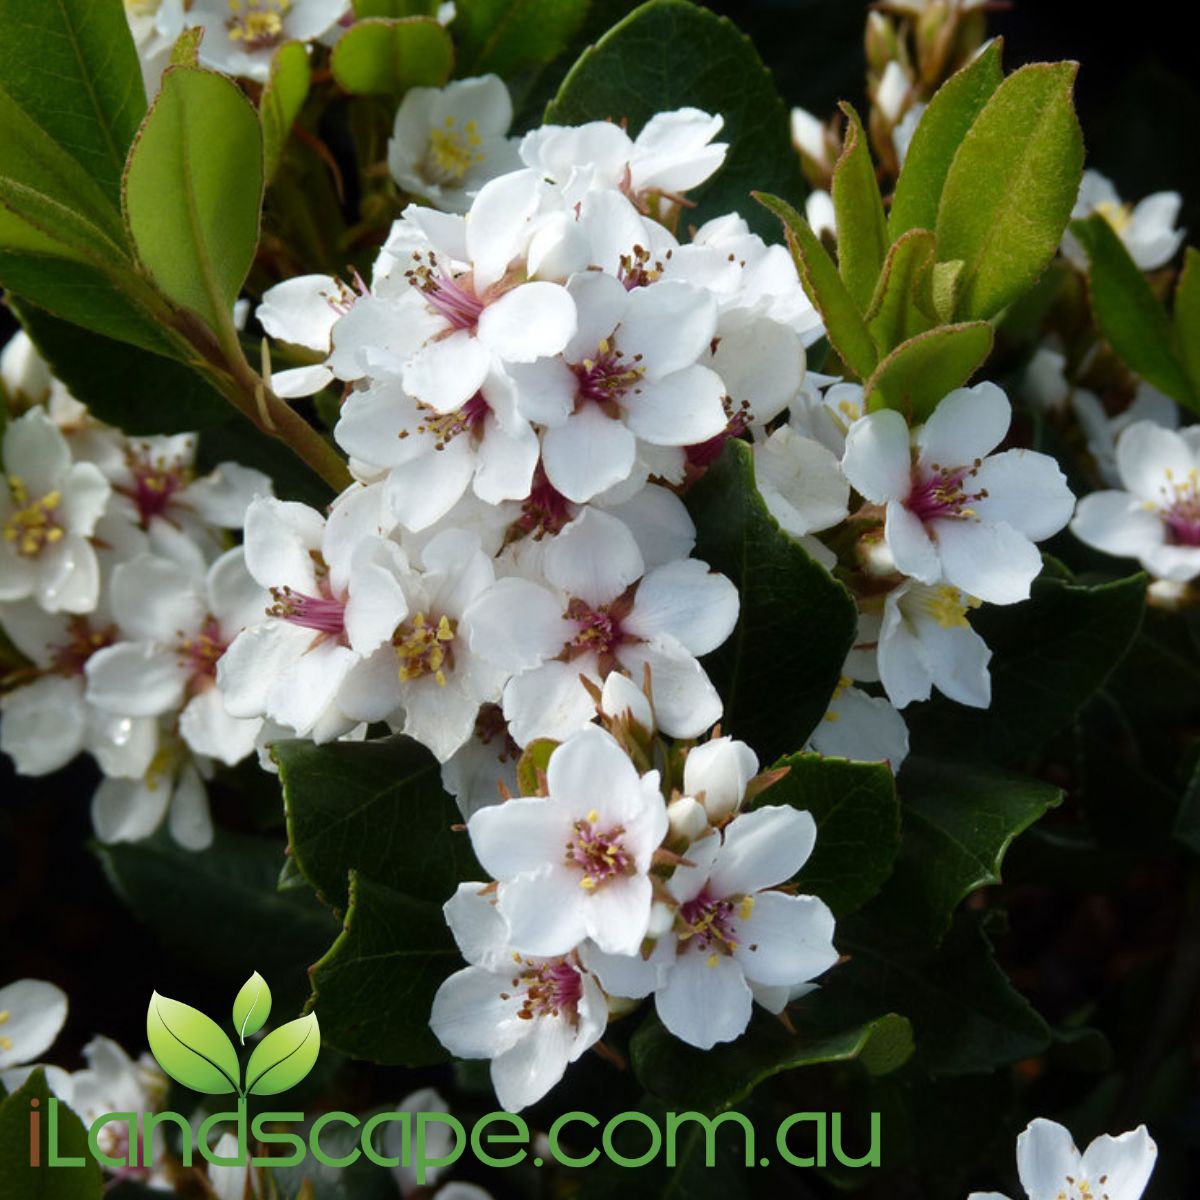 Rhaphiolepis Oriental Pearl is a compact, low growing evergreen shrub, producing an abundance of flowers in Winter / Spring.  Attractive white flowers with pink stamens fill the plant, leaves are dark glossy green